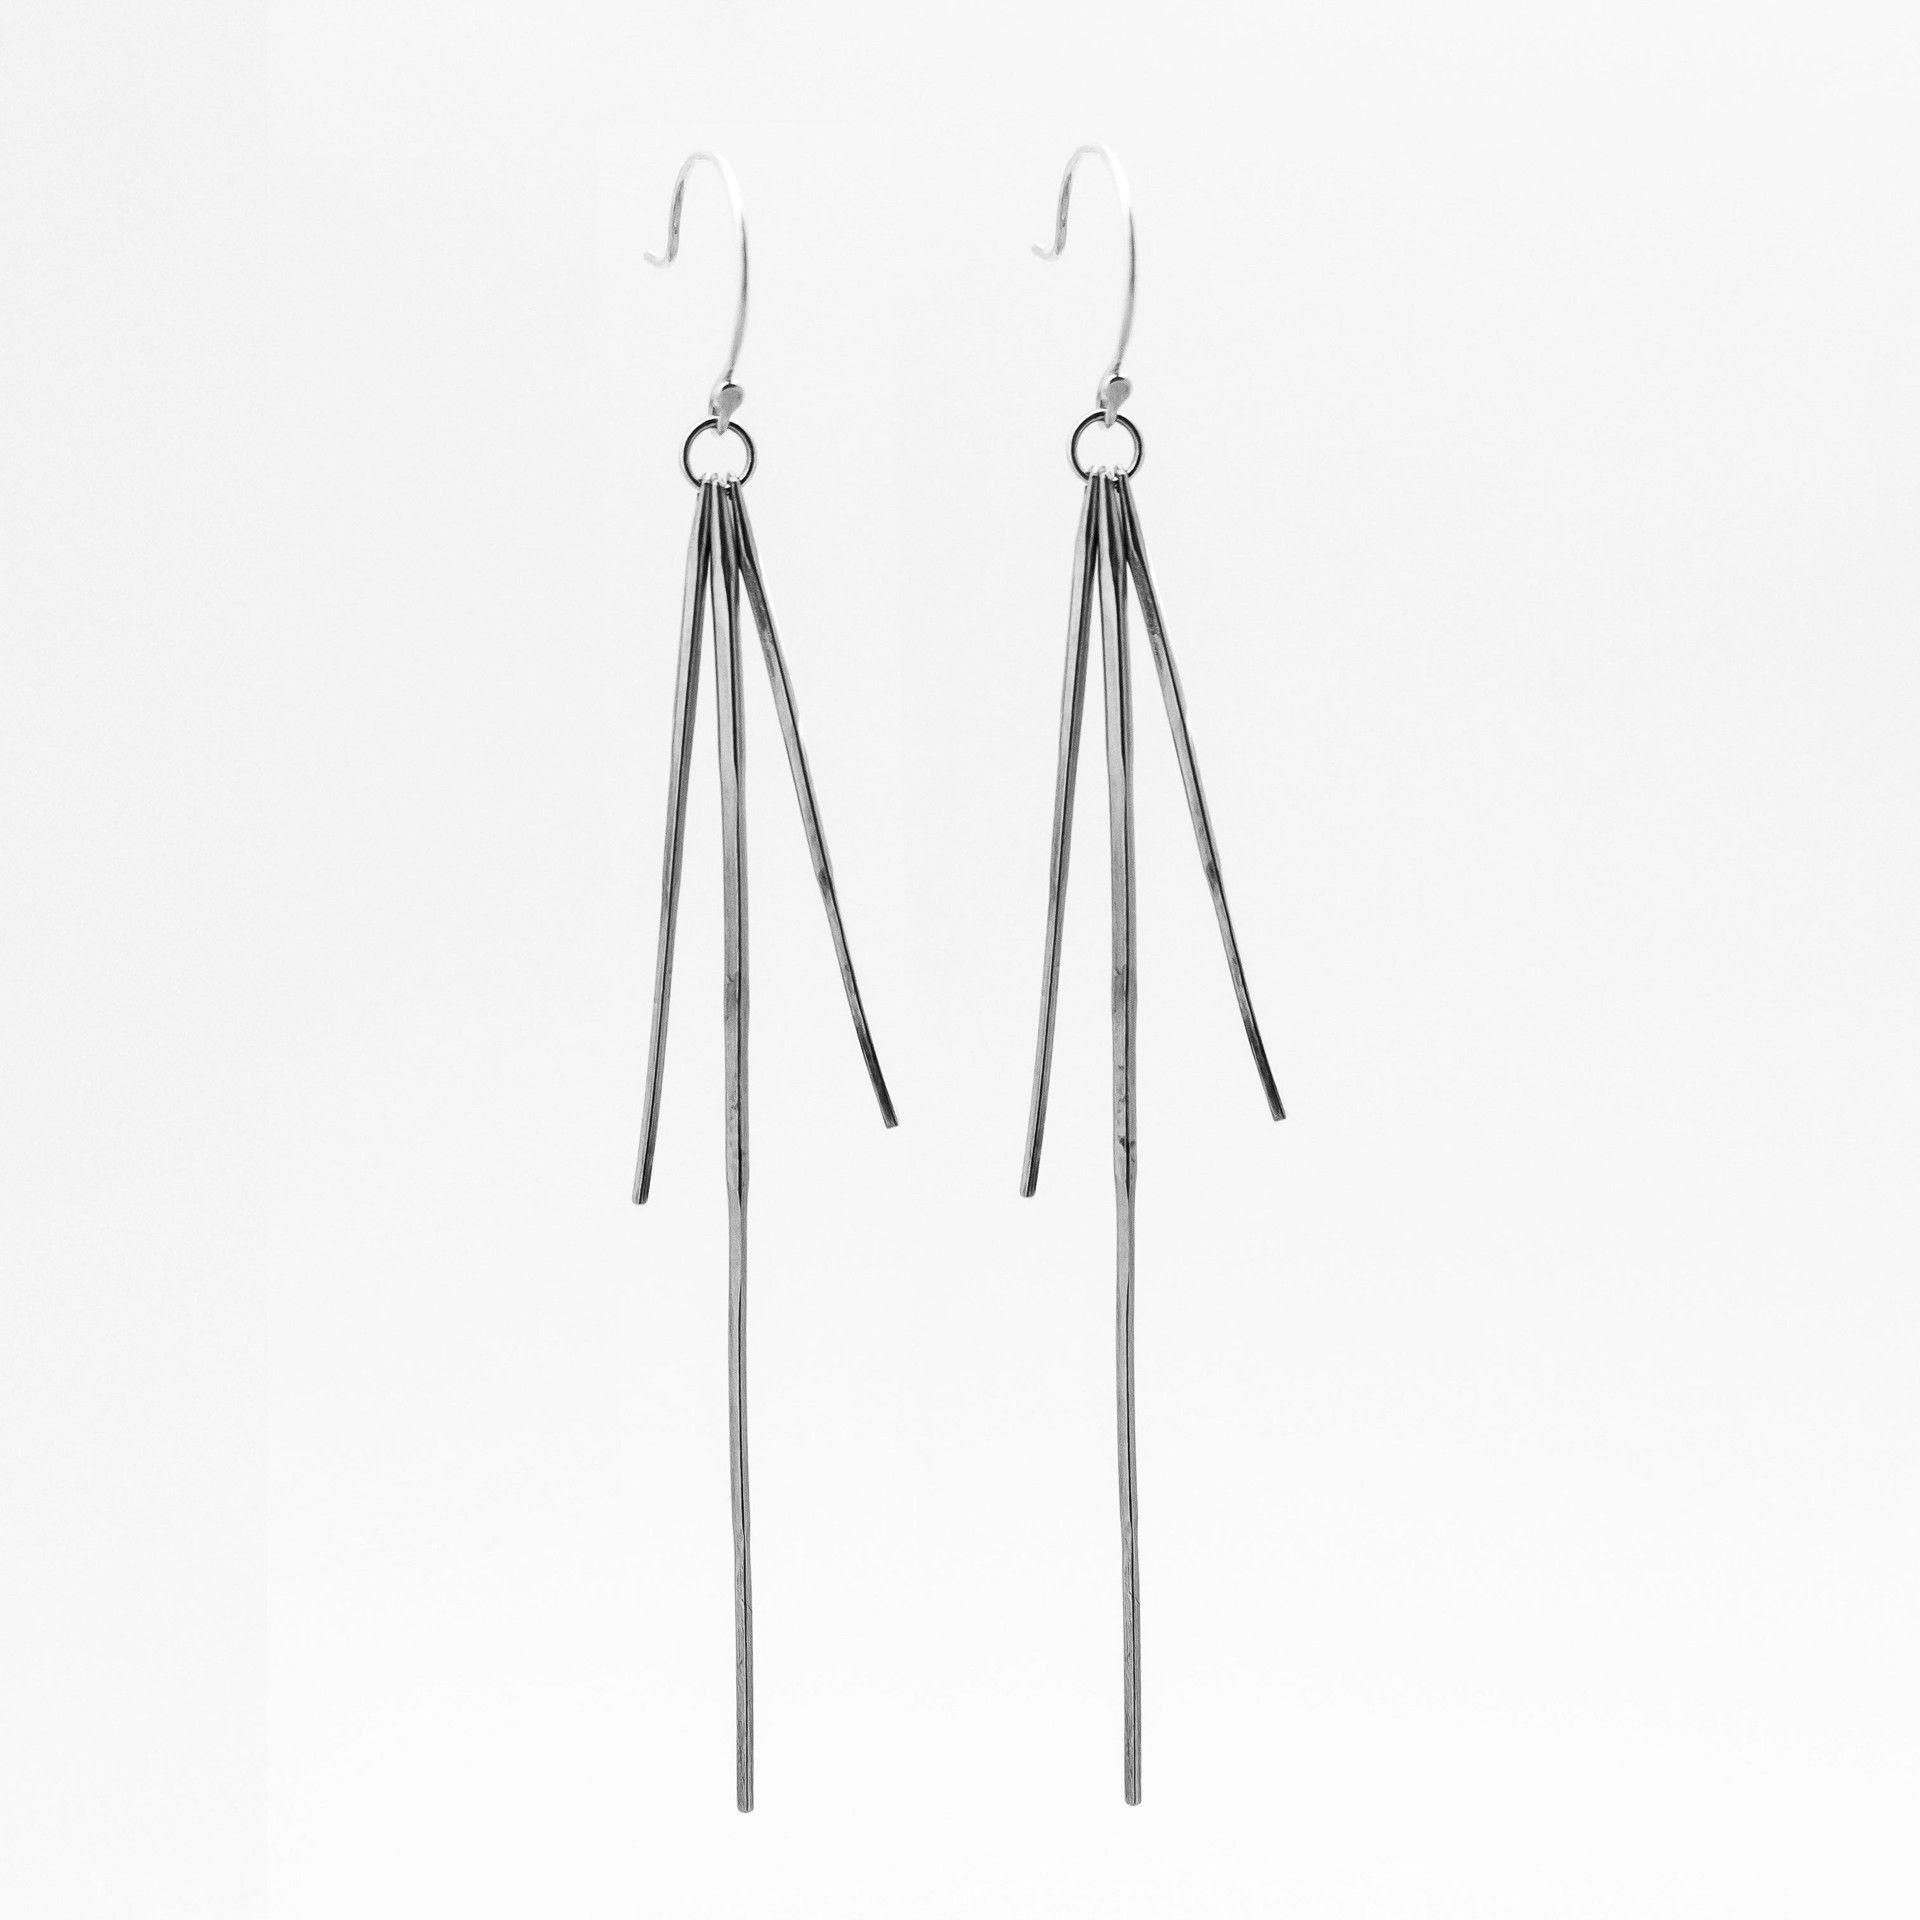 Cactus Spine Earrings by Clementine & Co. Jewelry